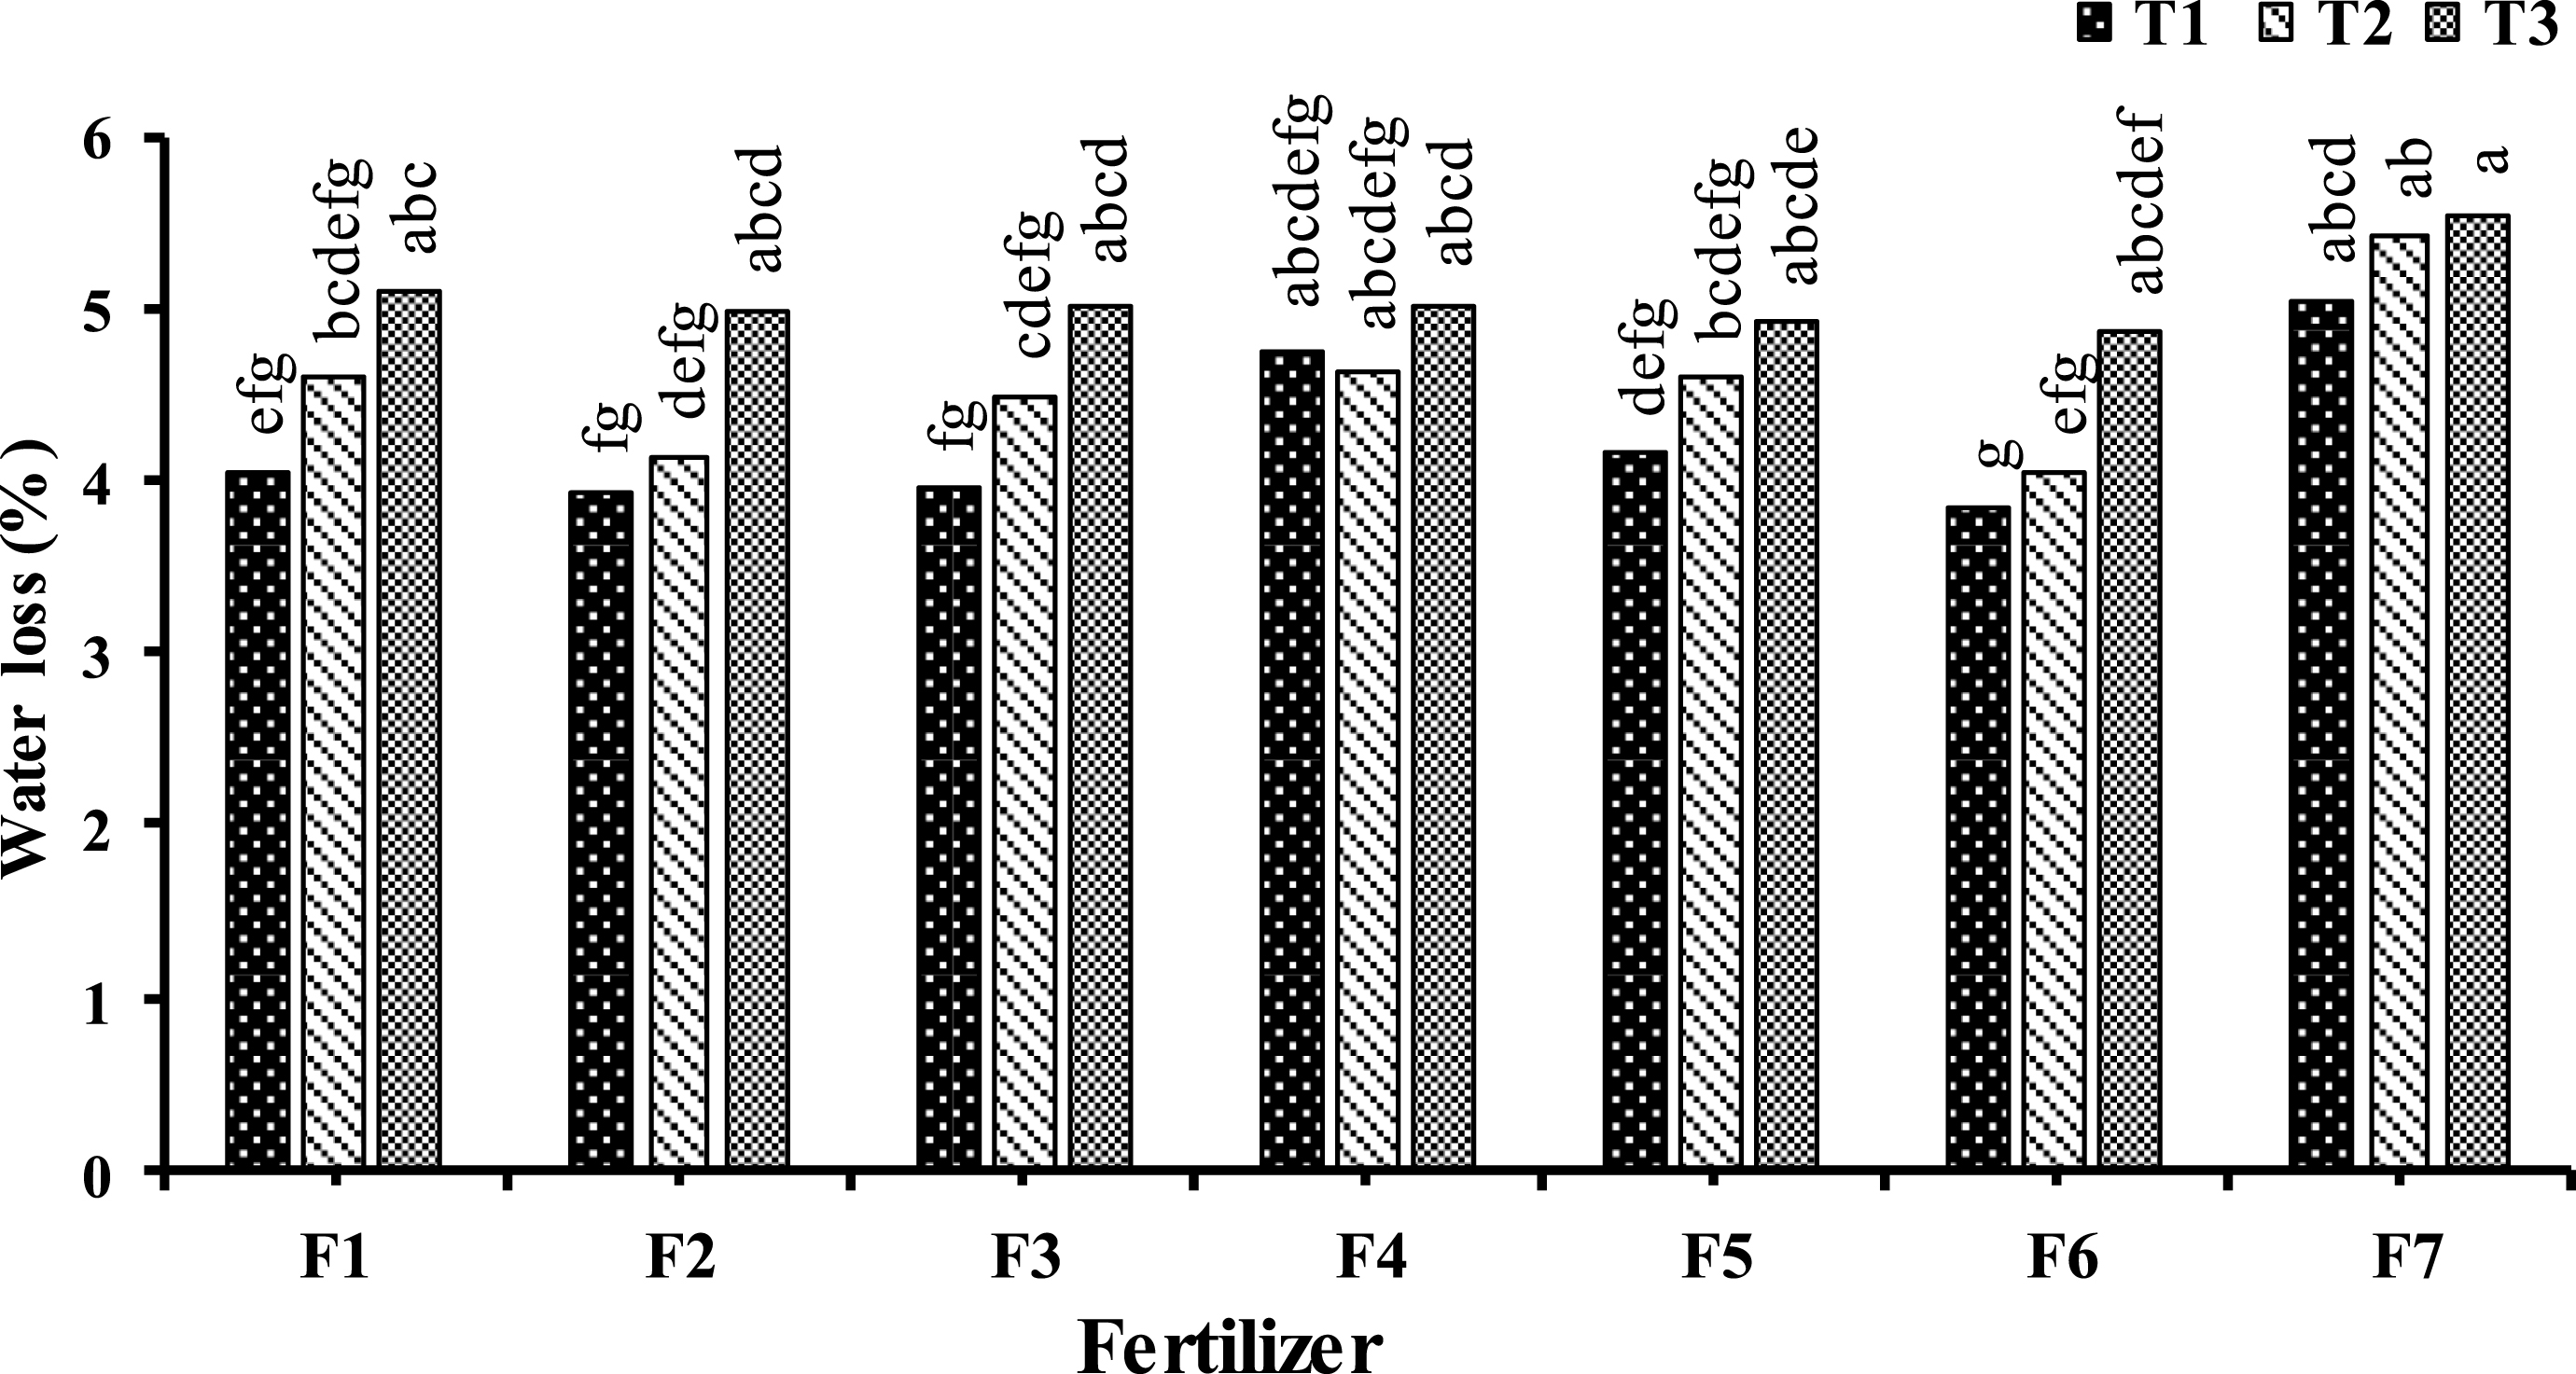 Effect of foliar application type F1: Urea (0. 5%); F2: H3BO3 (1000 mg.l–1); F3: ZnSO4 (1500 mg.L-1); F4: Urea (0.25%) + H3BO3 (500 mg.L-1) + ZnSO4 (1000 mg.L-1); F5: Urea (0. 5%) + H3BO3 (1000 mg.l–1) + ZnSO4 (1500 mg.l–1); F6: Urea (1%) + H3BO3 (1500 mg.l–1) + ZnSO4 (2000 mg.l–1); F7: (control) and time (T1: September 17, T2: October 7, T3: October 28) on kiwifruit weight loss after three month storage. Data were presented as a mean value of the two years.